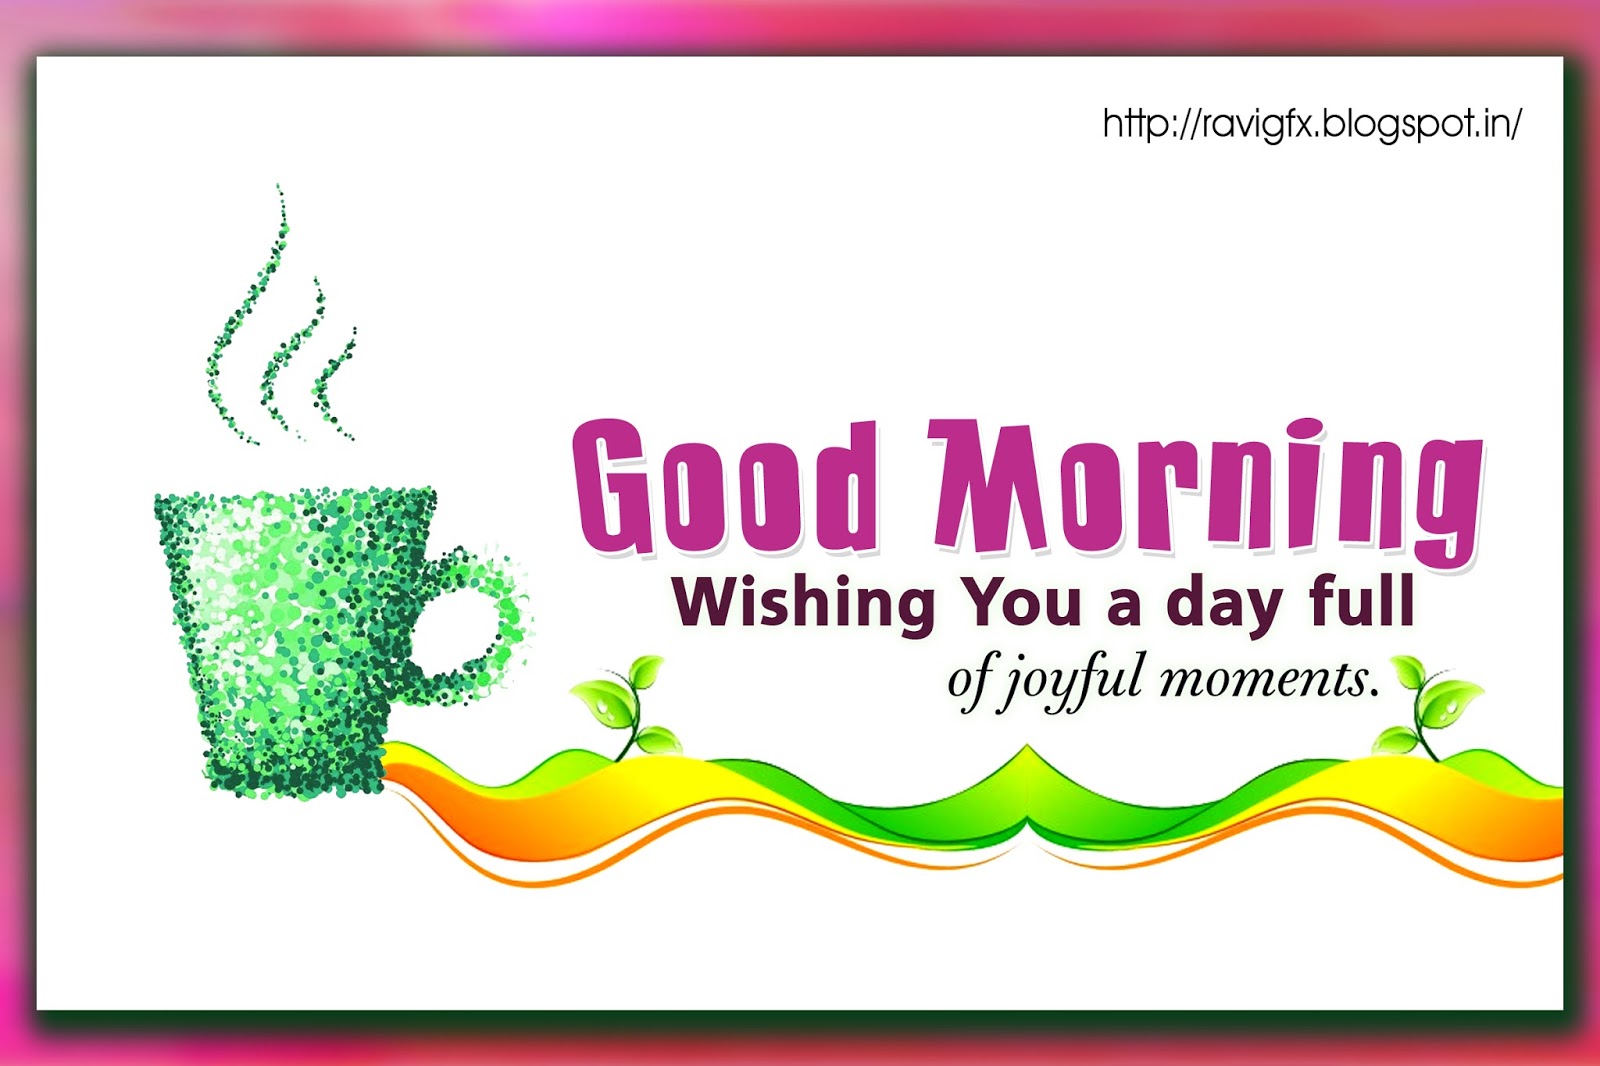 good morning pictures images hd wall papers for face book - ravigfx